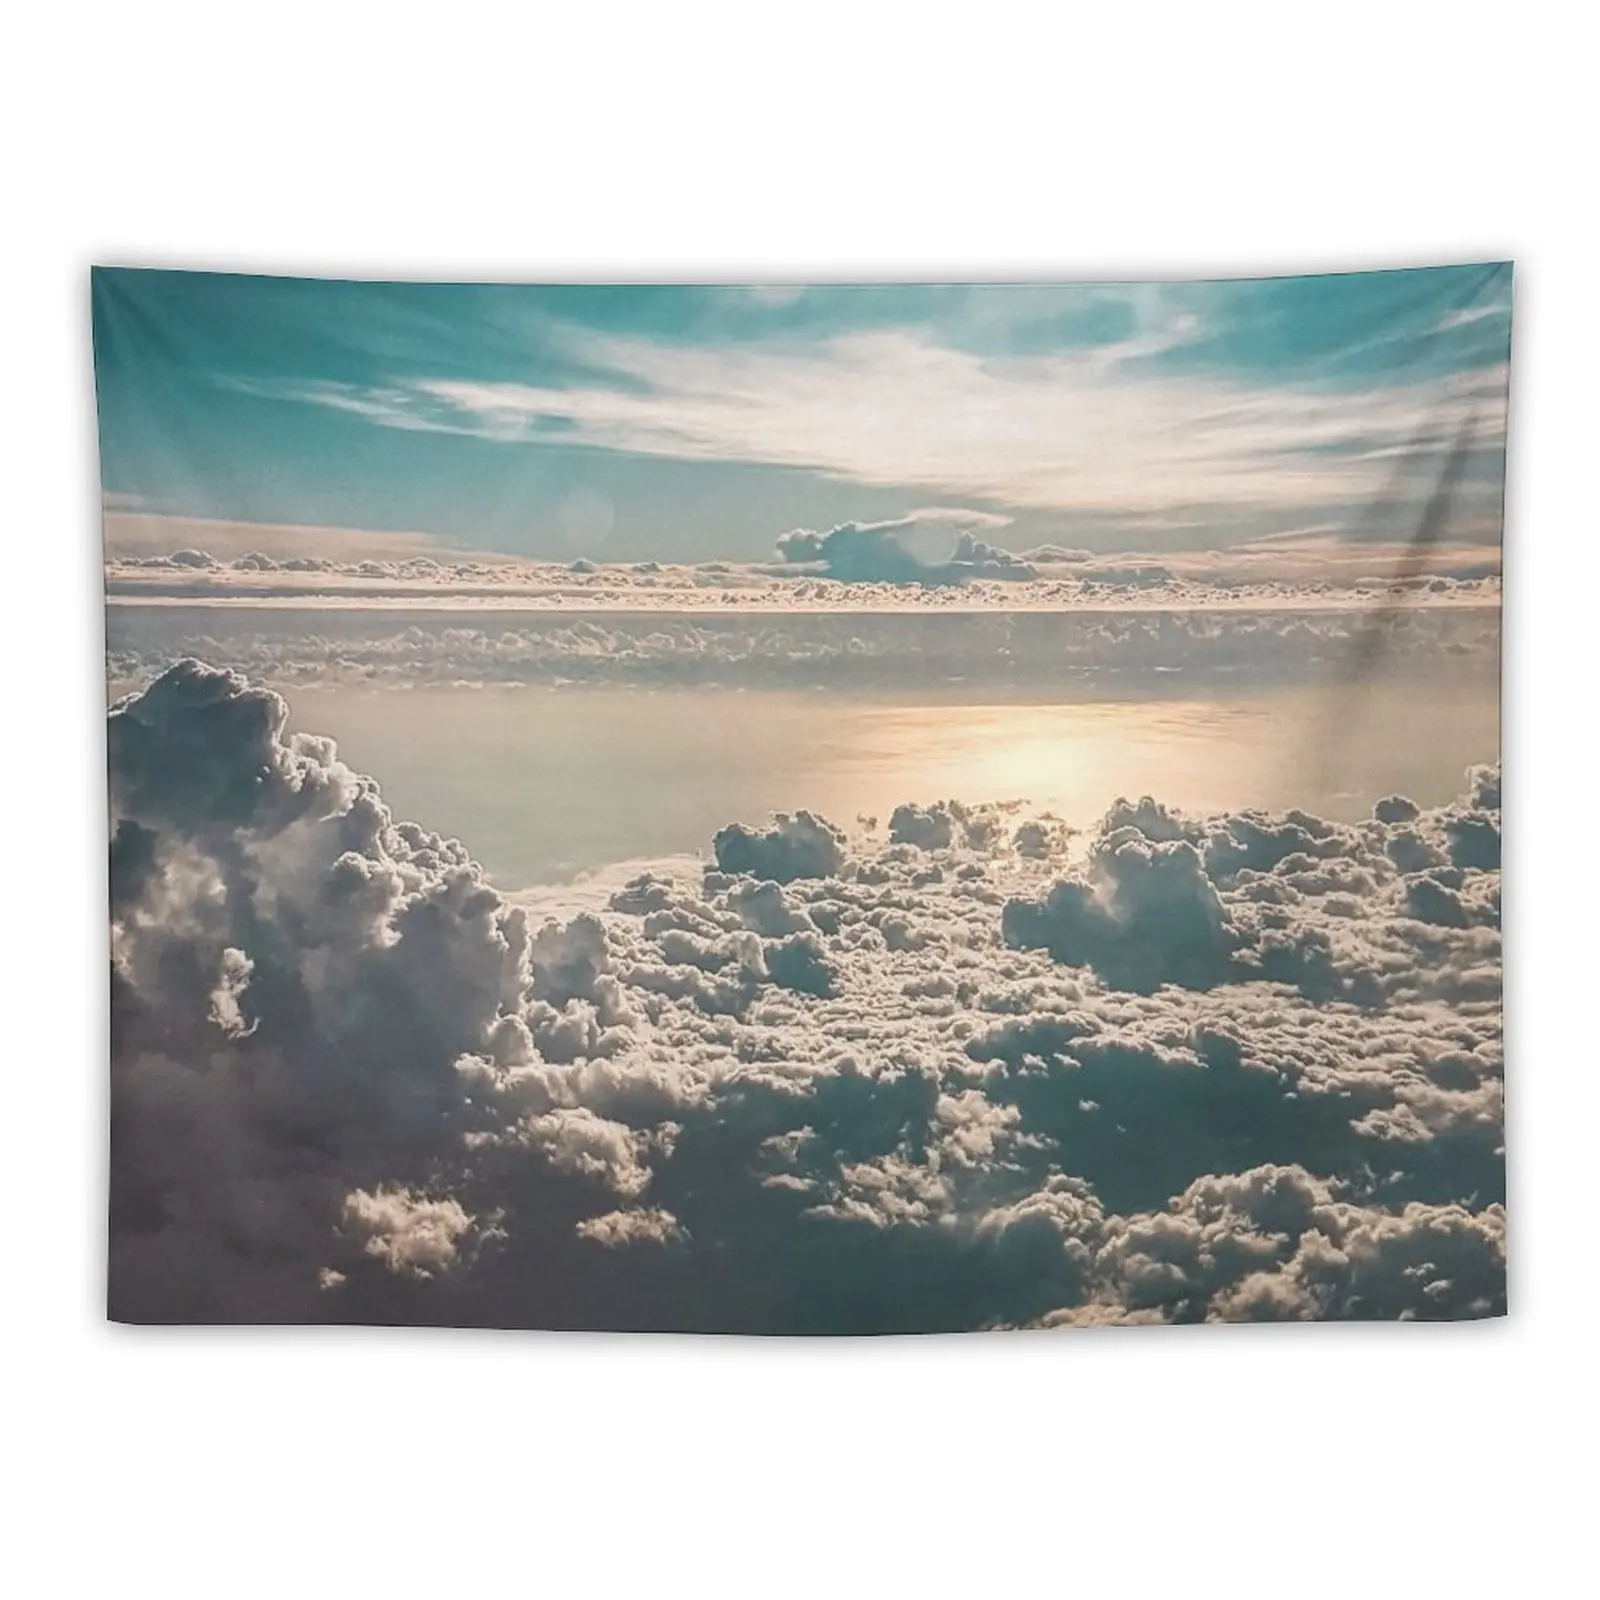 

Above the clouds Tapestry Cute Room Decor Kawaii Room Decor Home Decorating